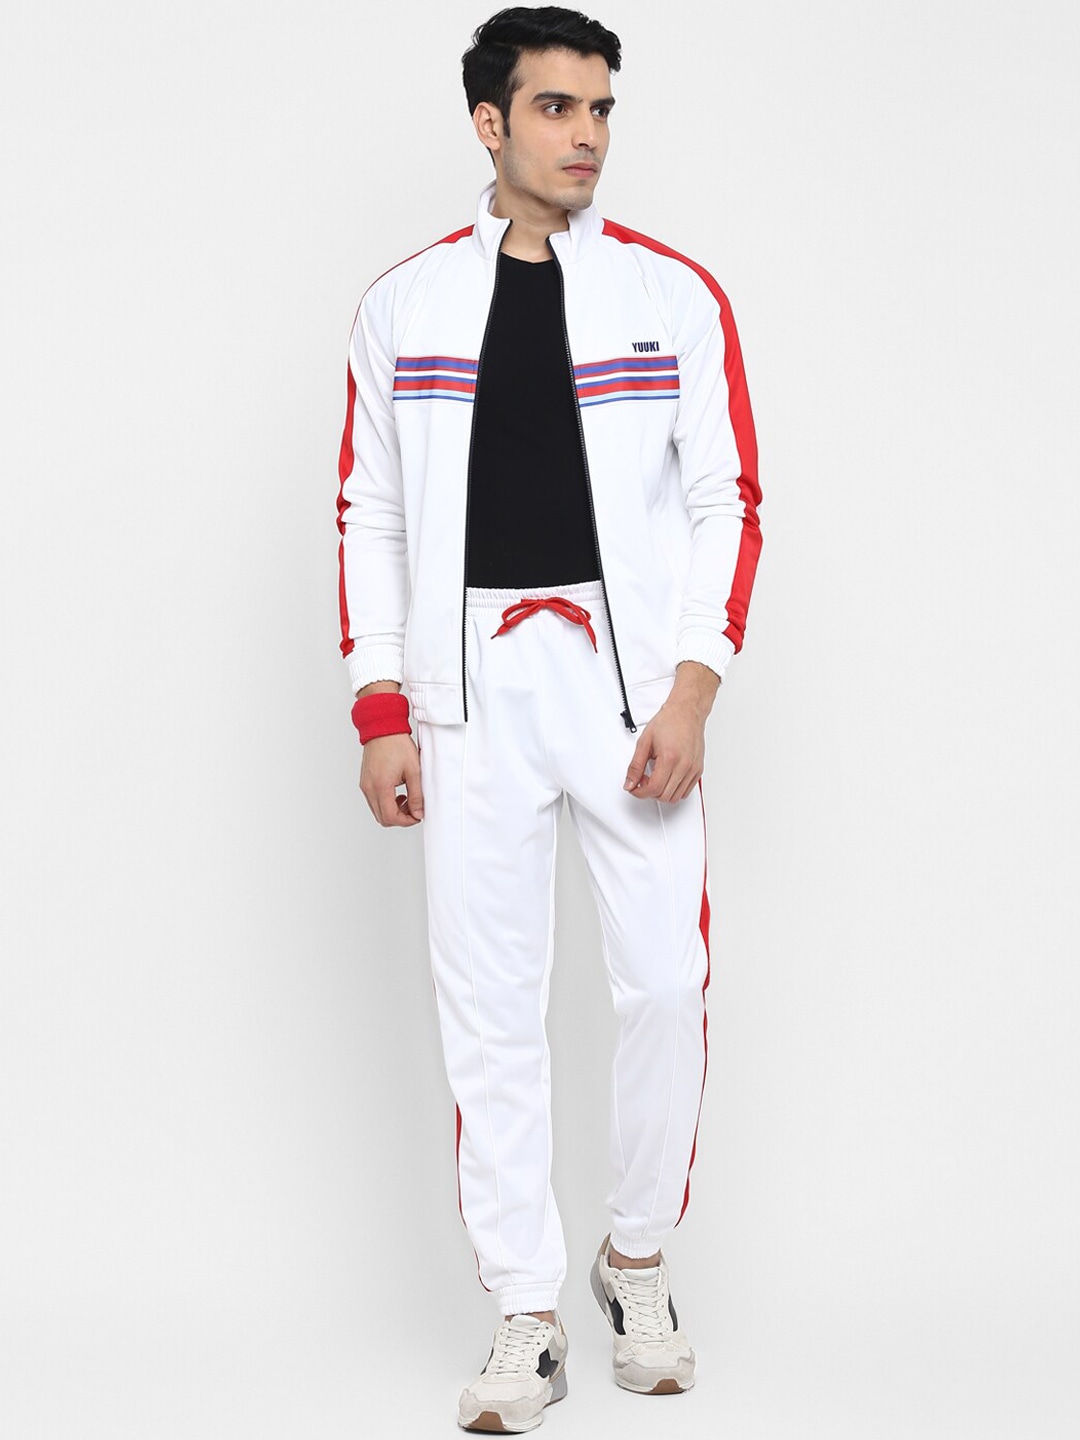 Clothing Tracksuits | Yuuki Men White Solid Track Suit - GO92300